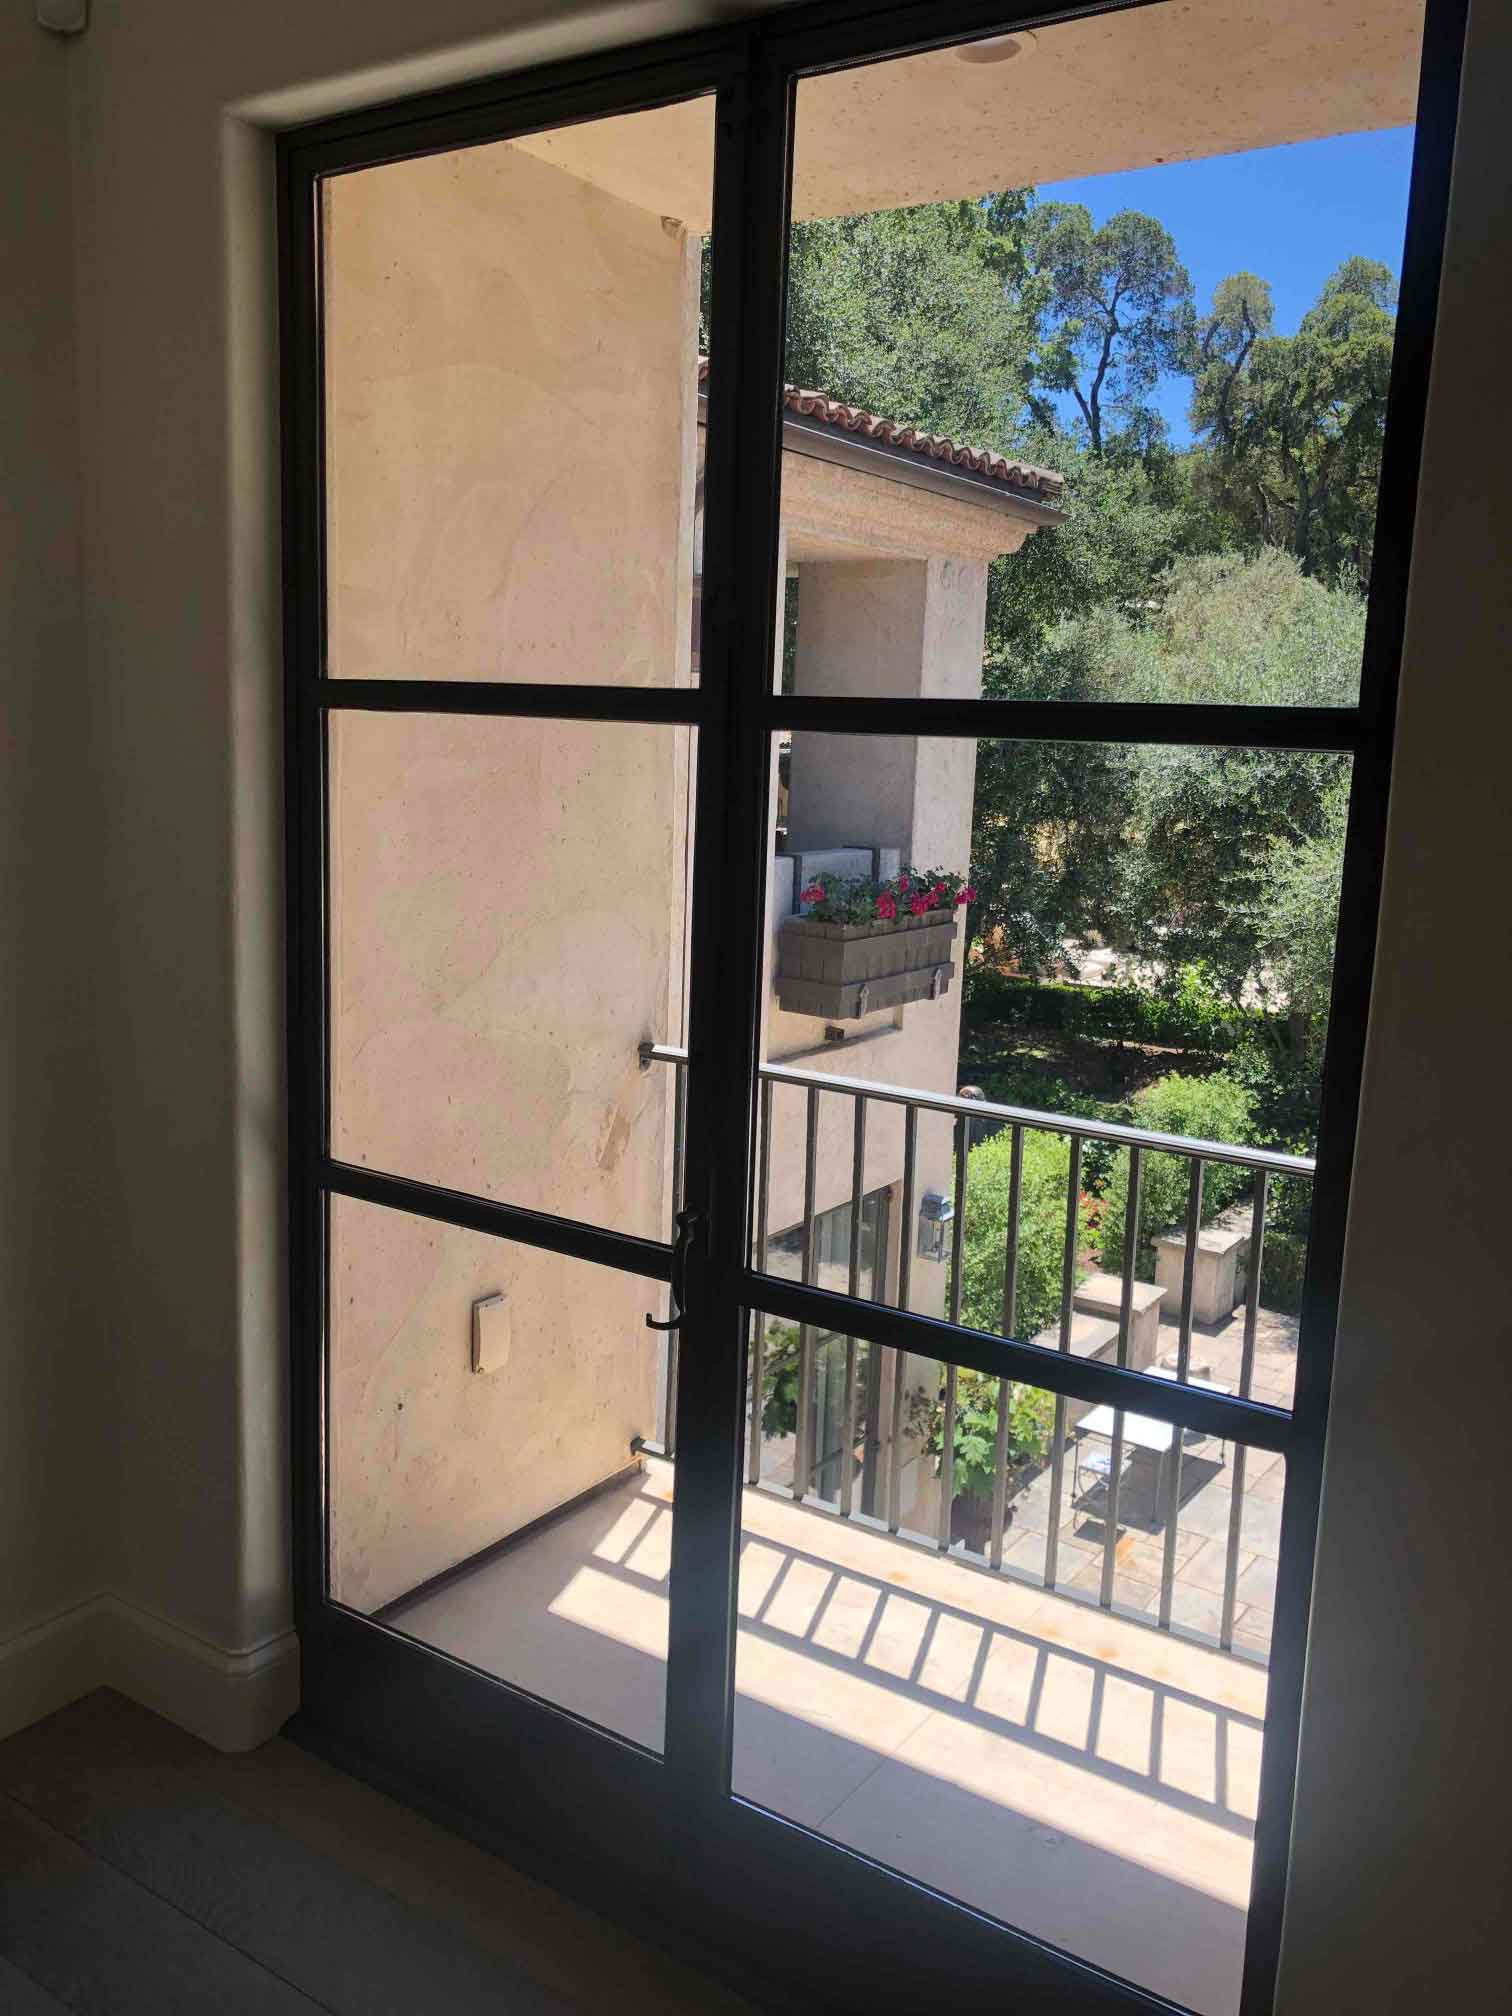 ClimatePro installed 3M Prestige 70 Sun Control Window Tint in this Woodside, CA Home